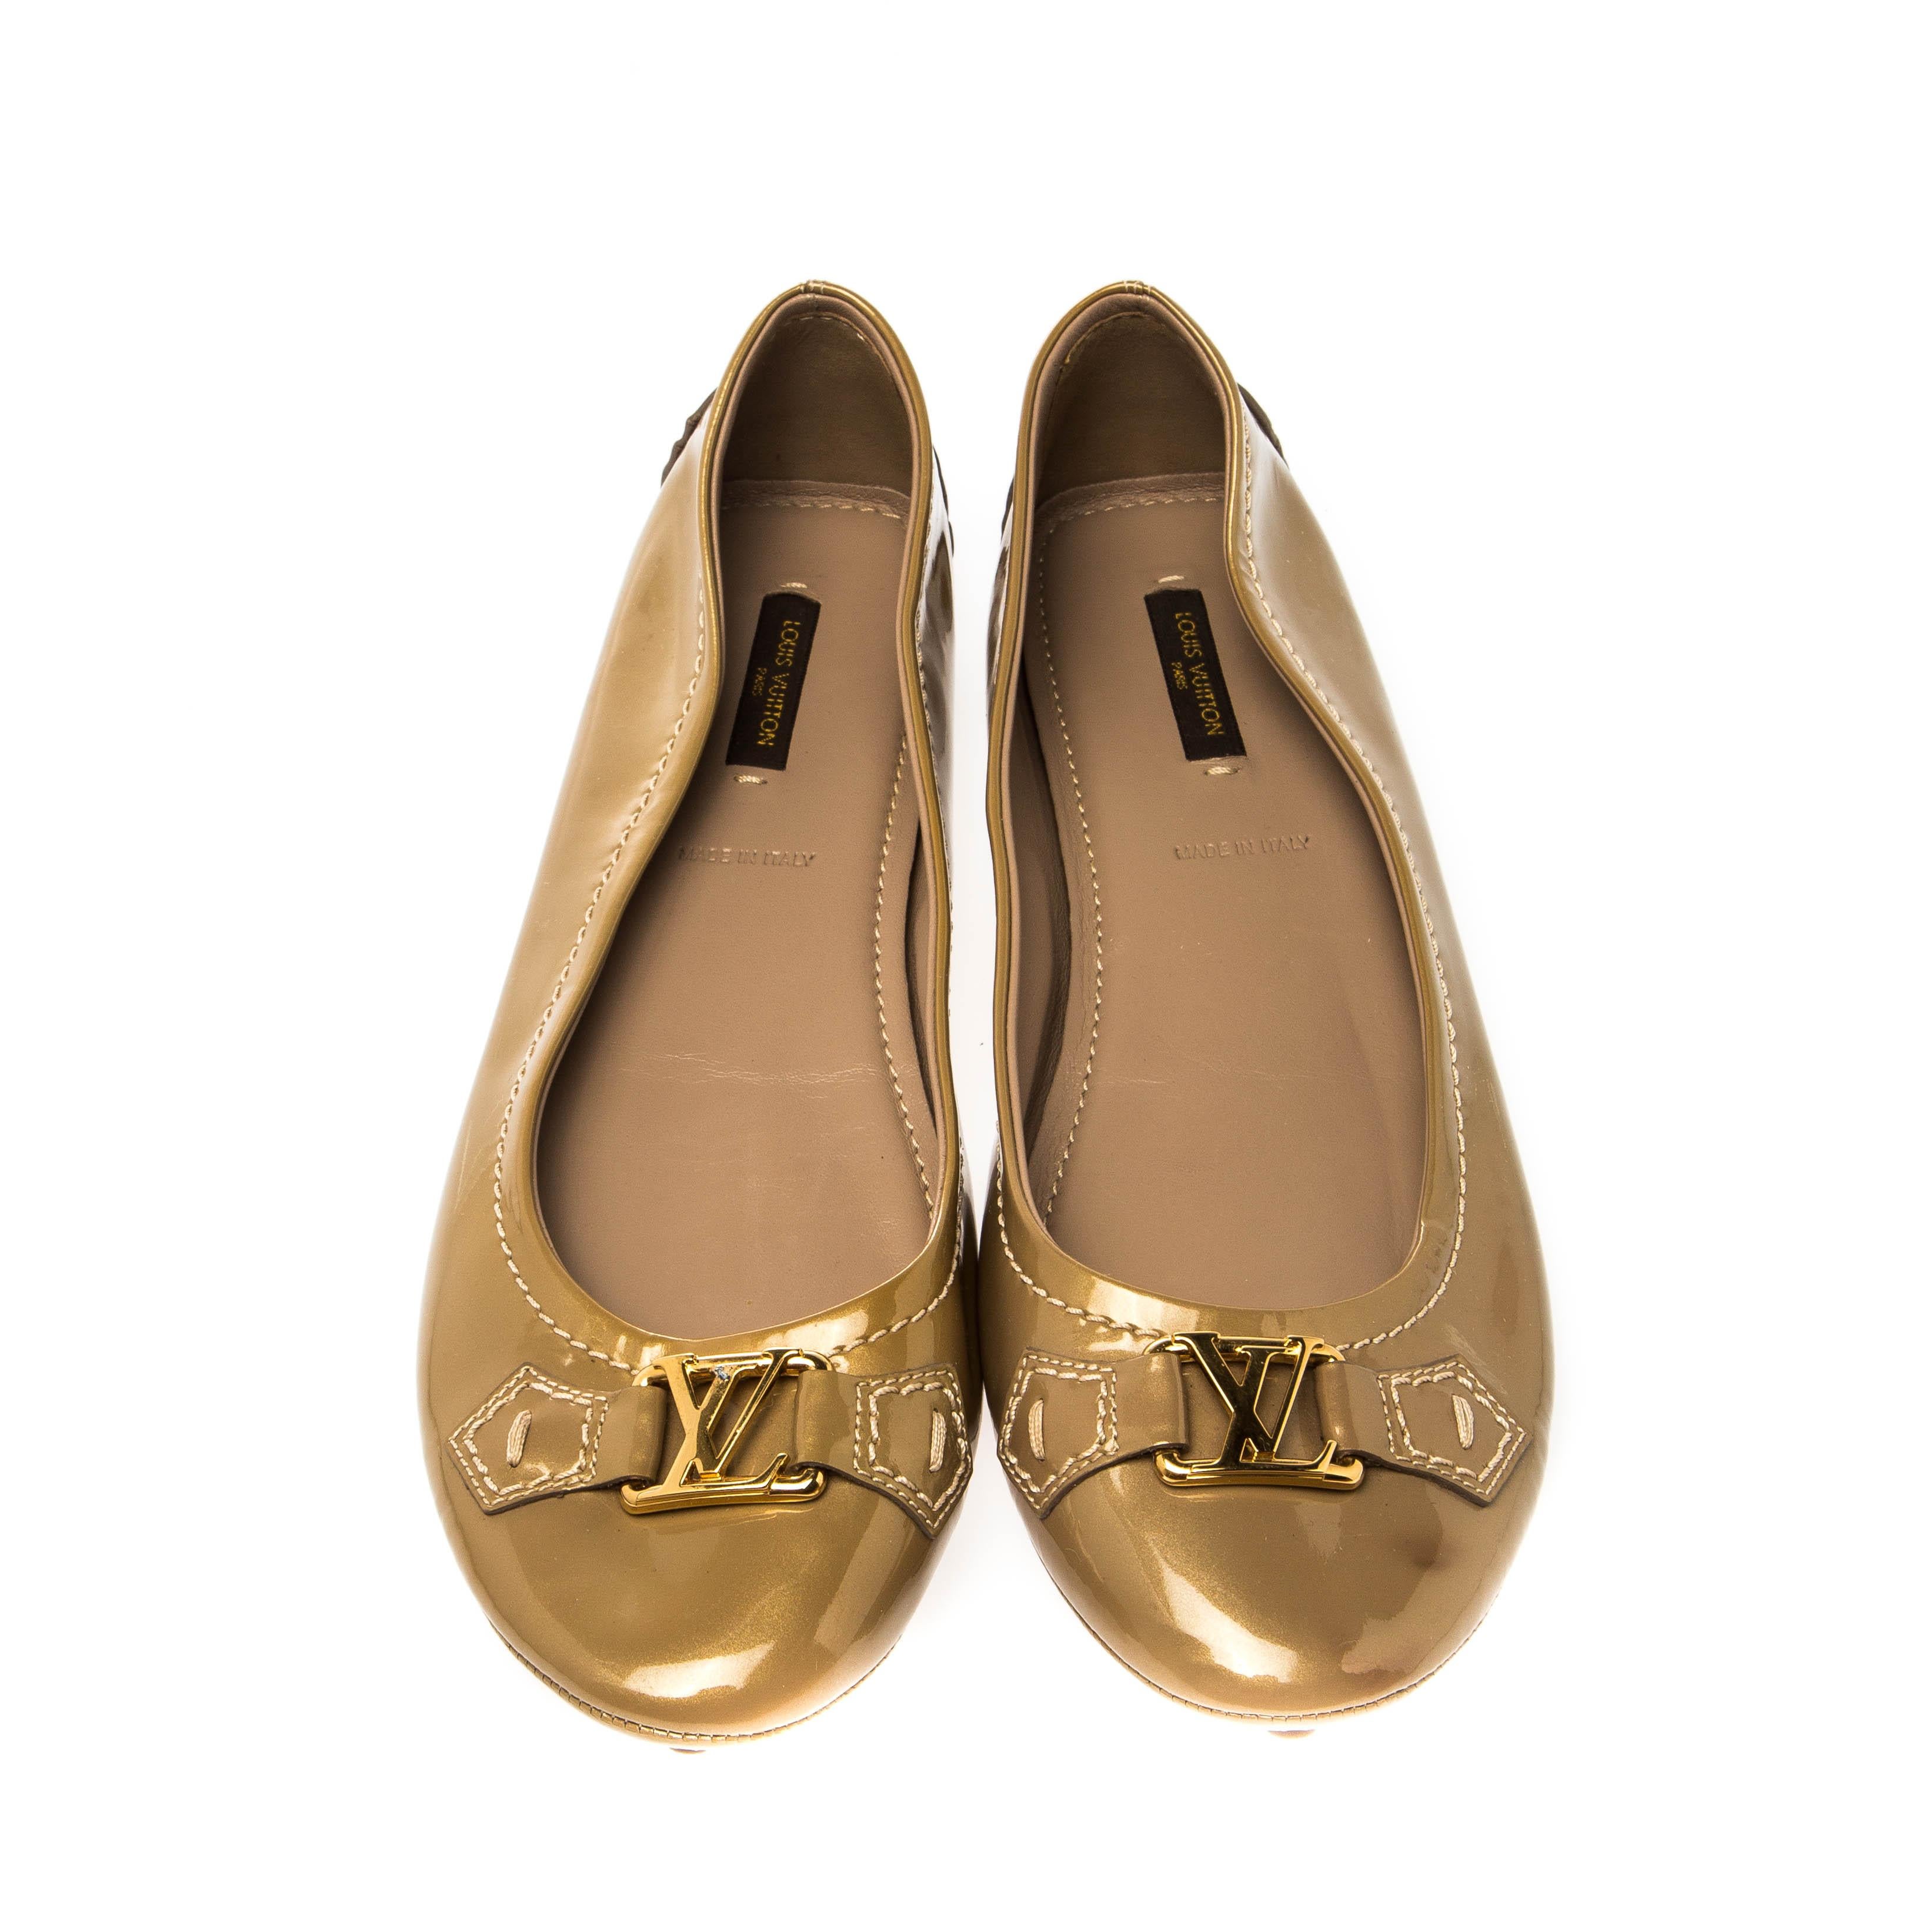 Chic and smart, these patent leather ballet flats are adorned with gold-tone LV accents on the vamps. These fabulous flats have round toes and rubber pebbling on the outsoles. From Louis Vuitton, they are perfect to be paired with any outfit of your